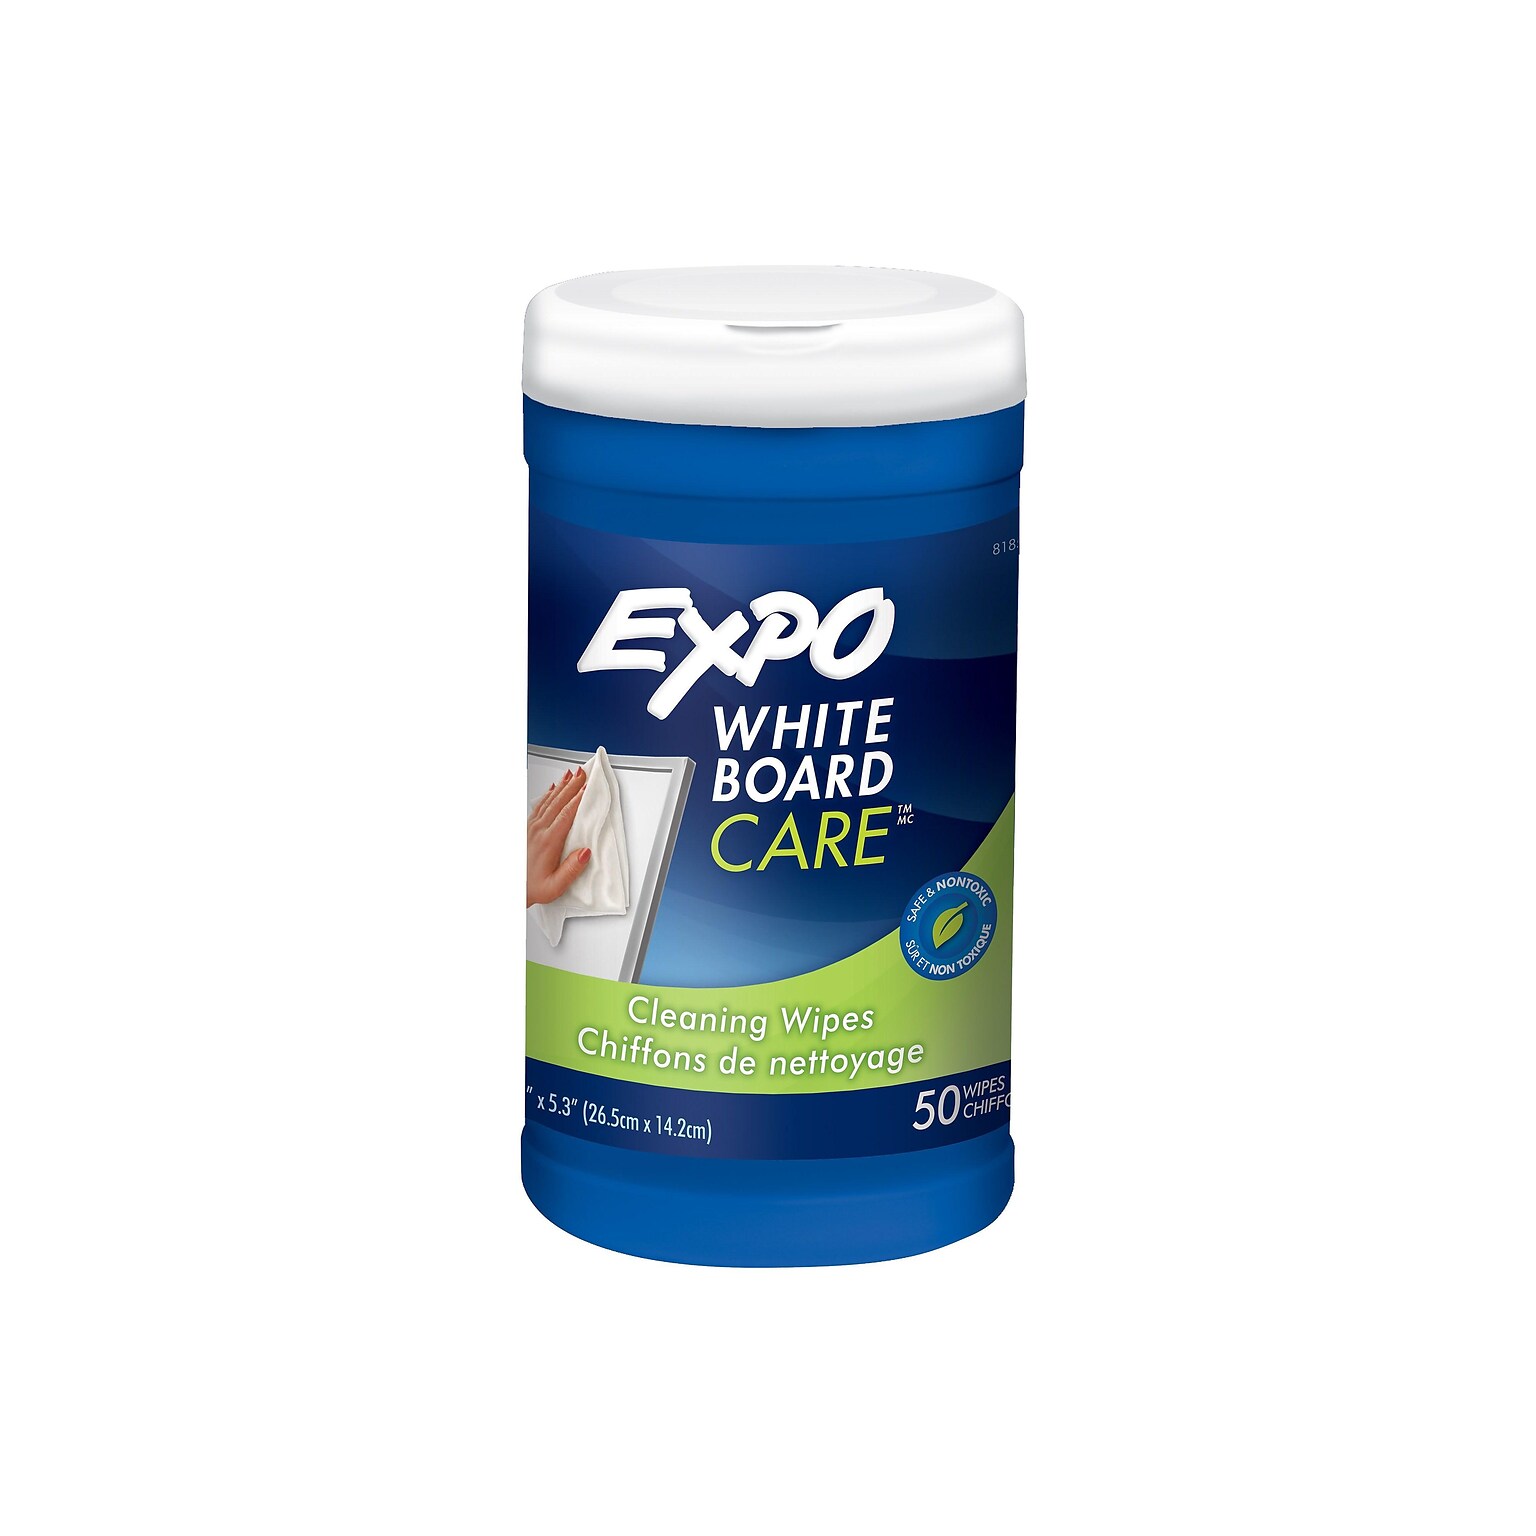 Expo Whiteboard Care Dry Erase Wipes, 5.5 x 10, White, 50/Container (81850)